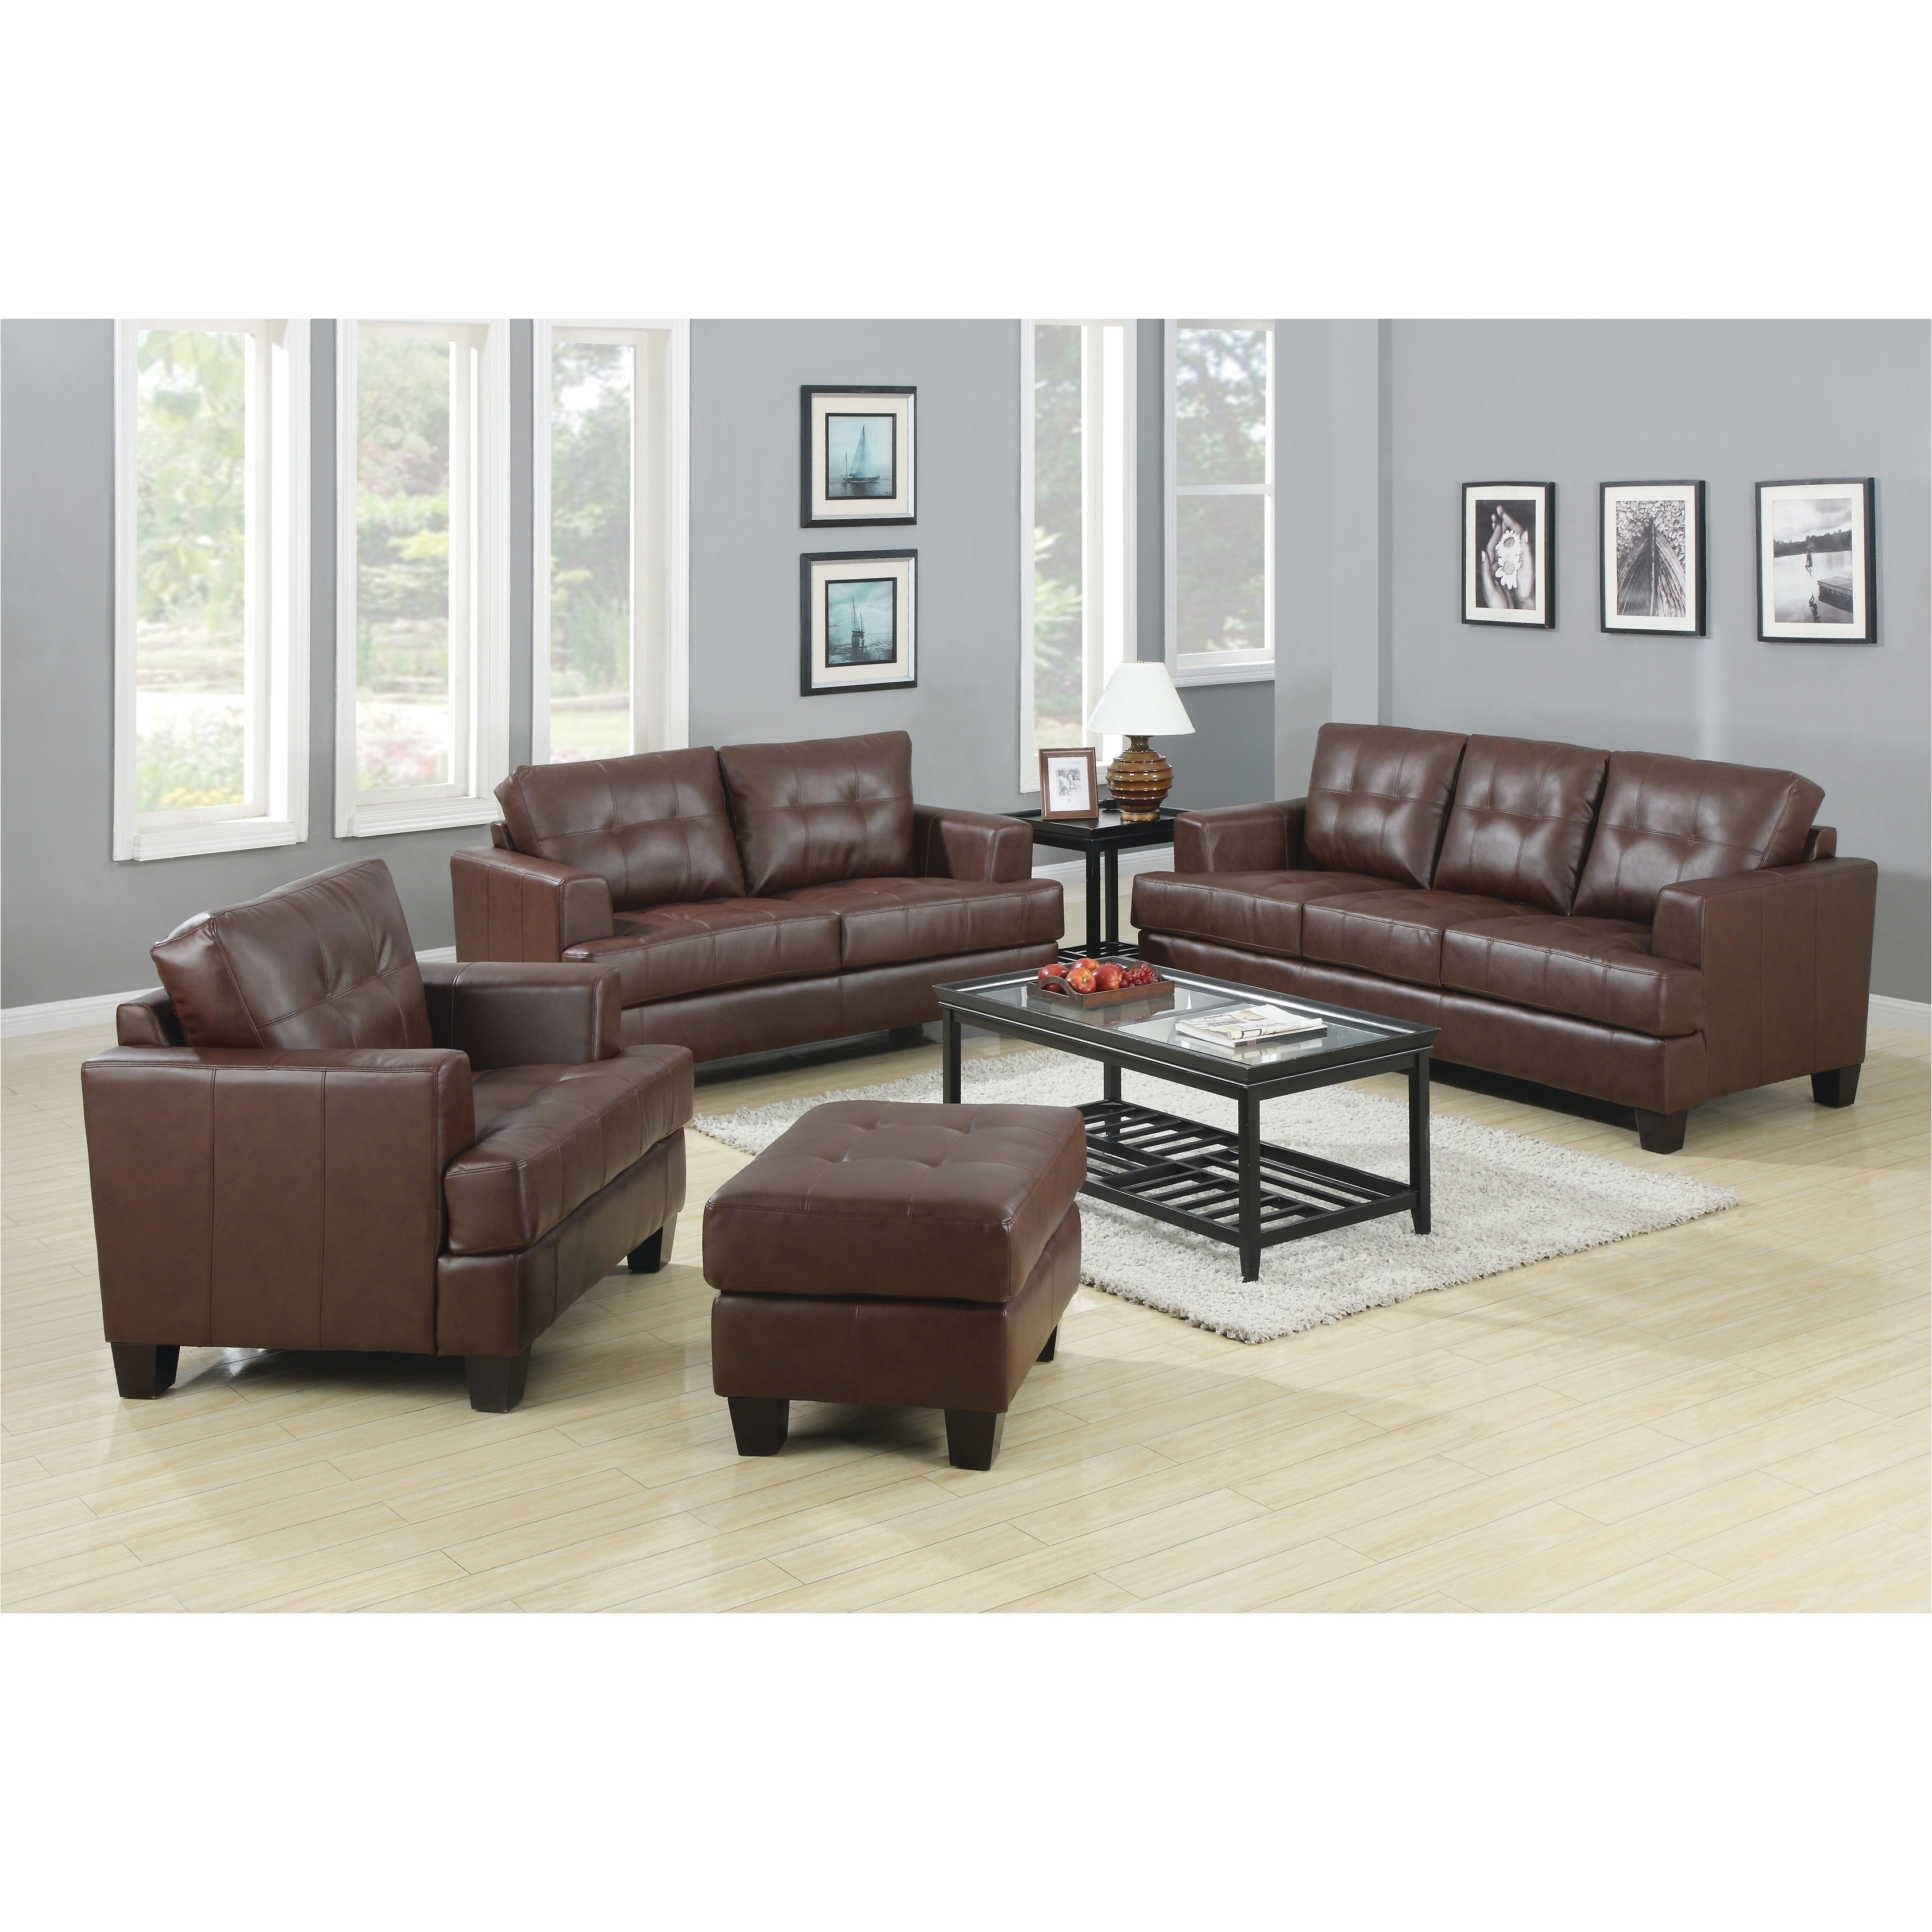 Samuel Transitional Brown 3 piece Living Room Set Free Shipping Today Overstock